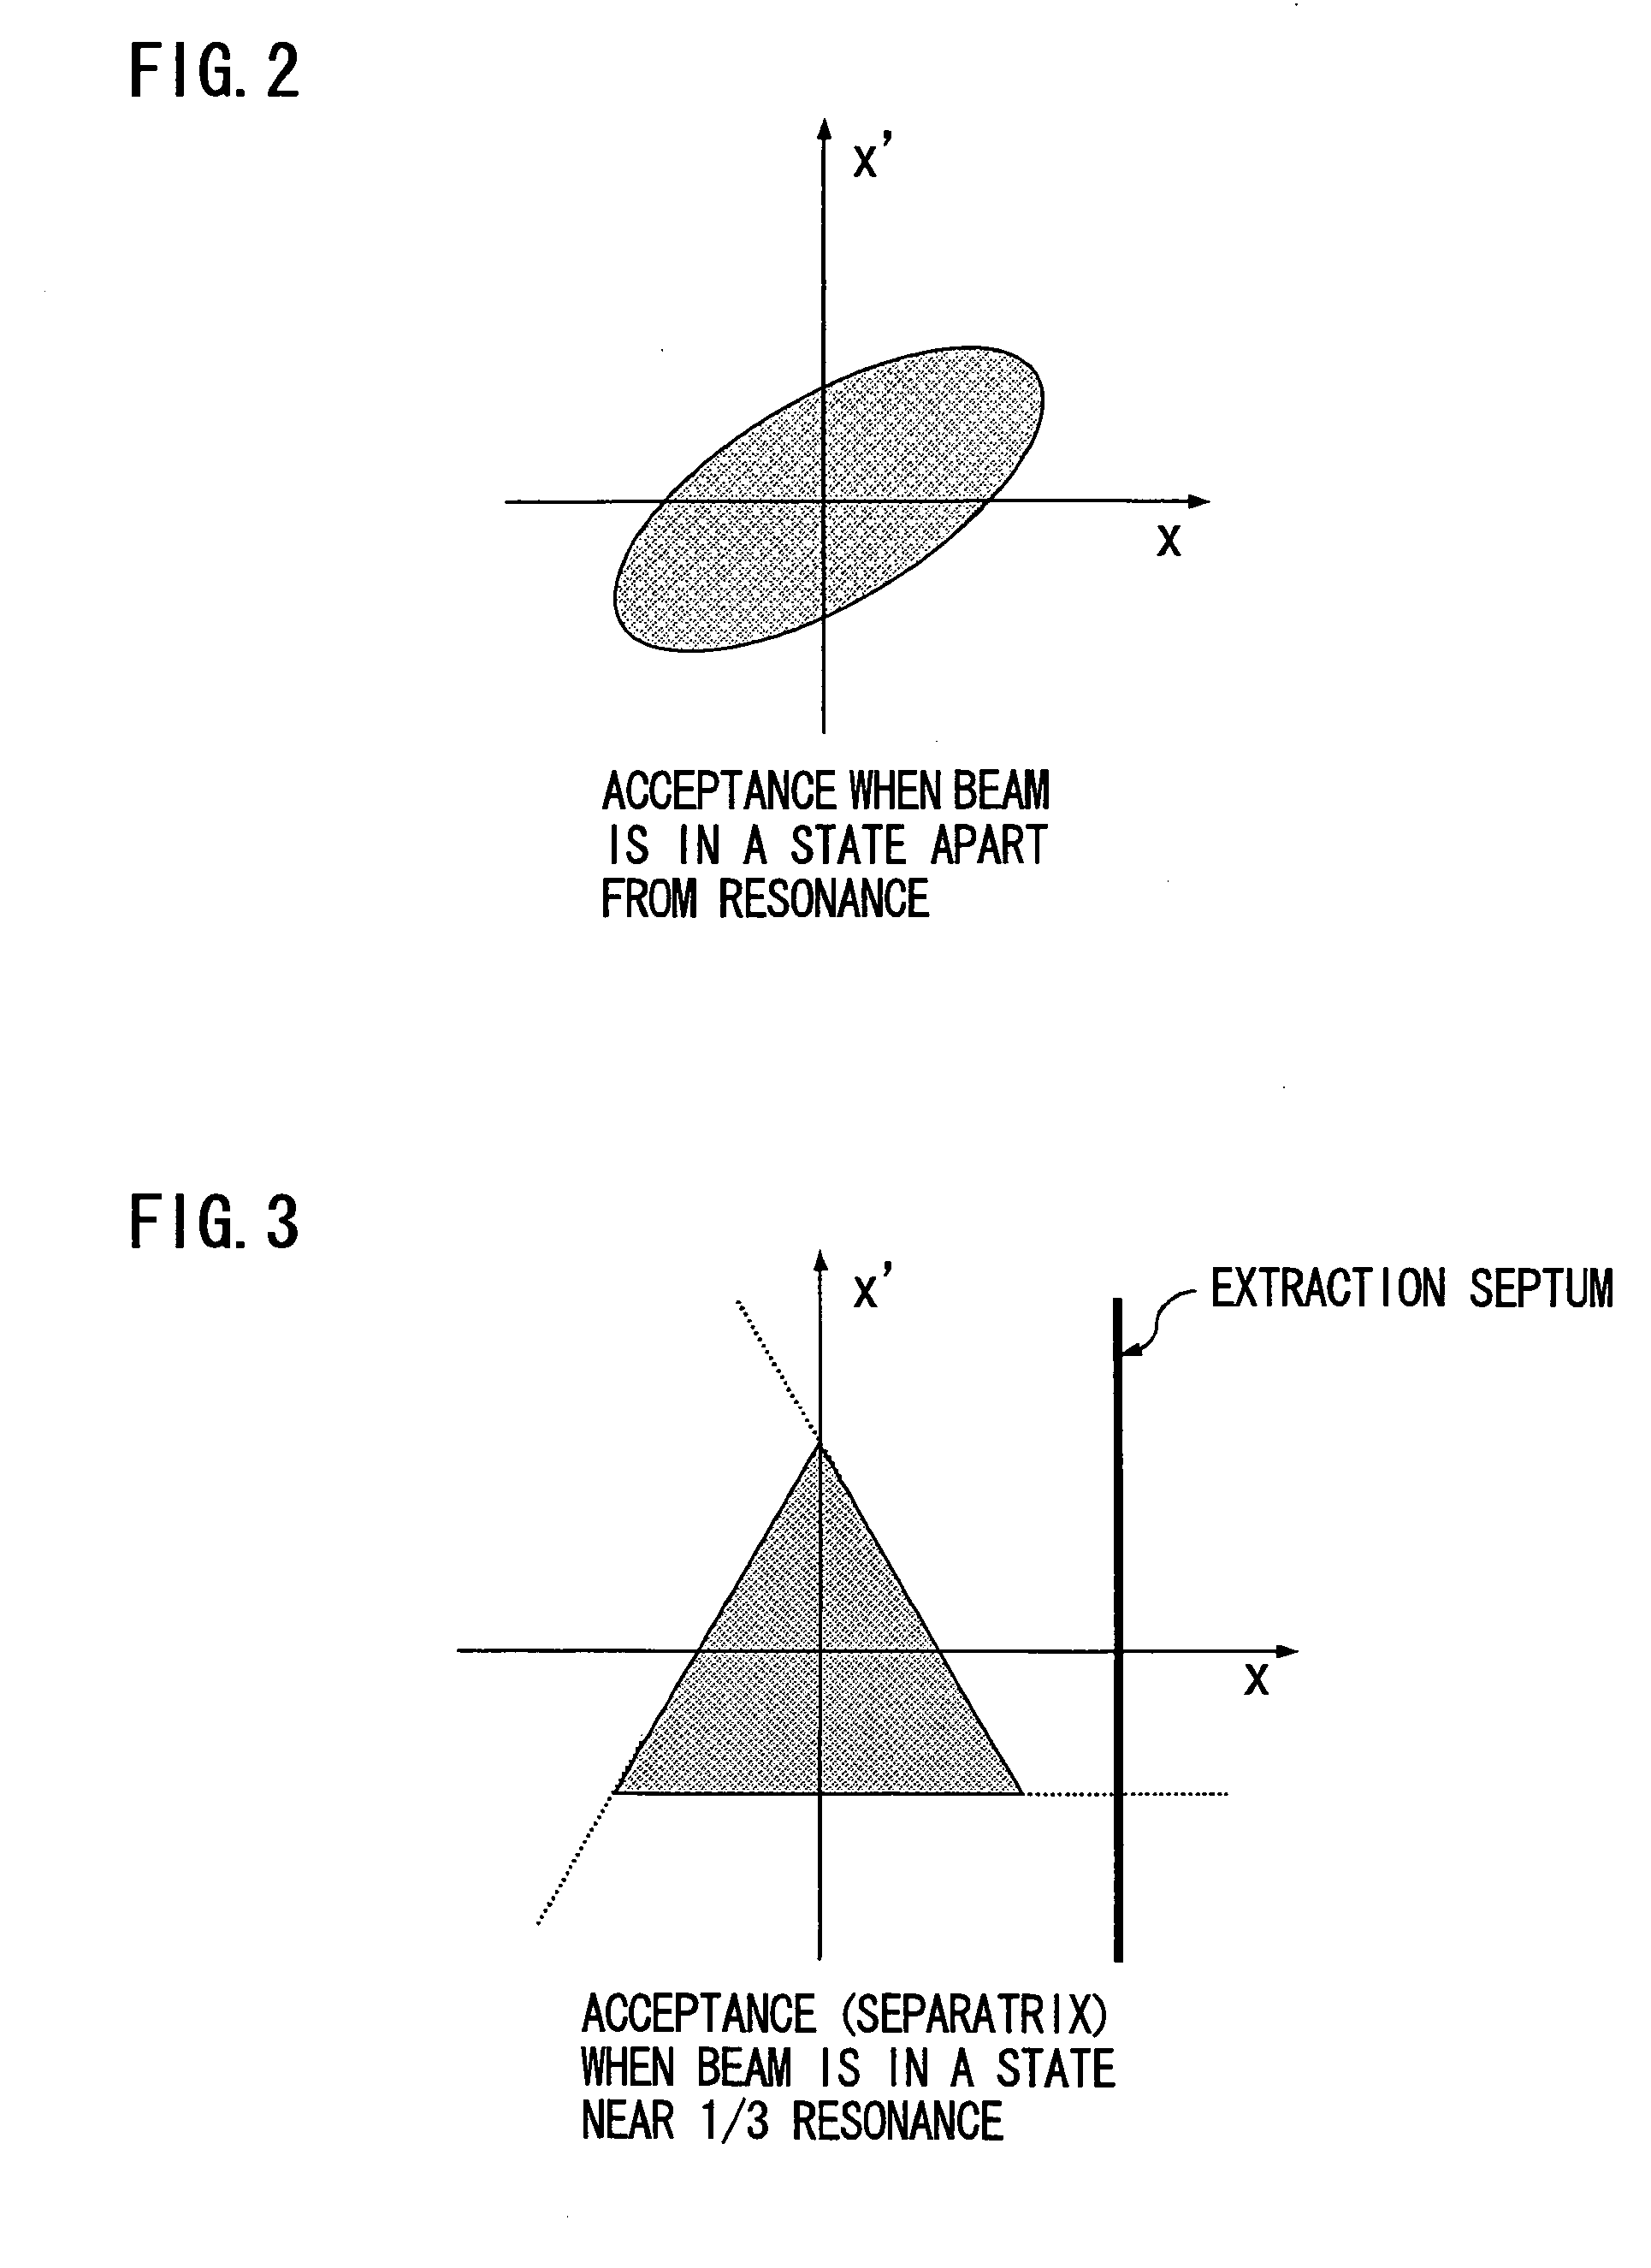 Charged-particle beam accelerator, particle beam radiation therapy system using the charged-particle beam accelerator, and method of operating the particle beam radiation therapy system